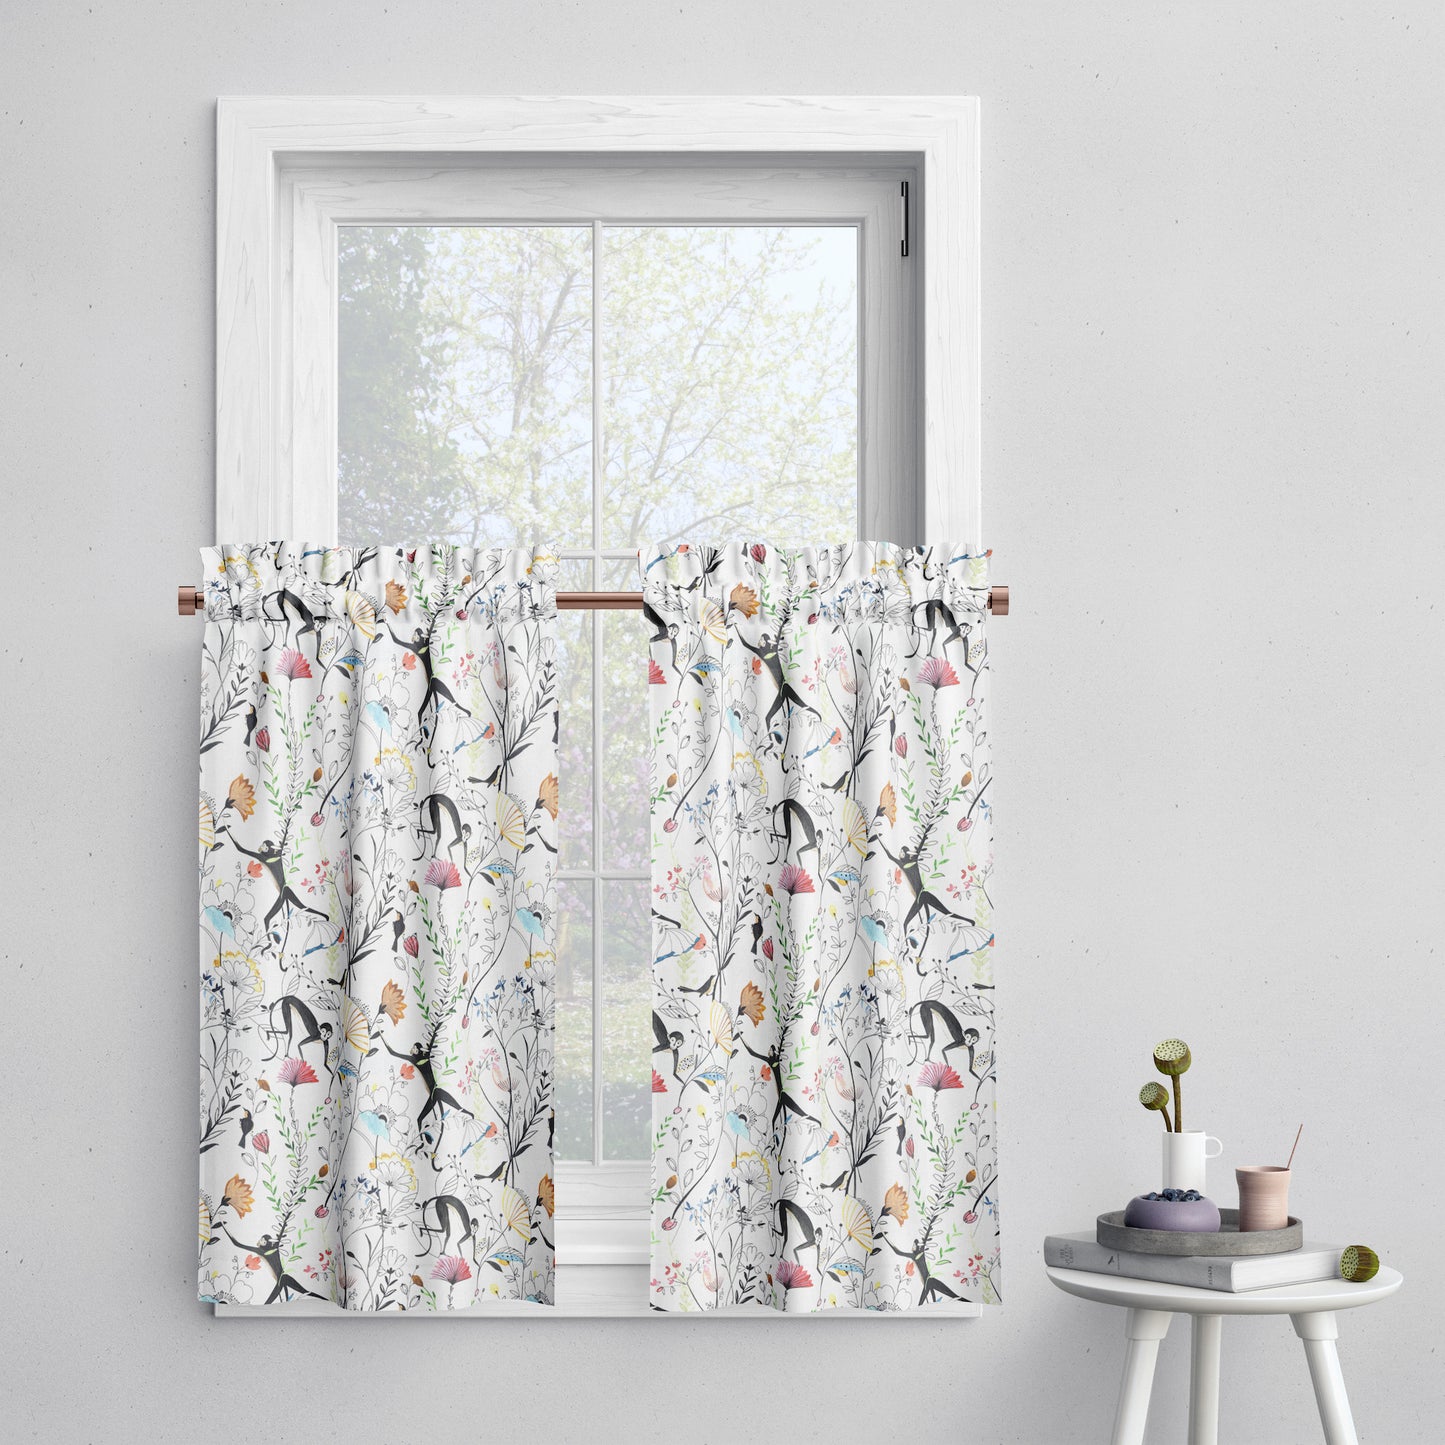 Tailored Tier Cafe Curtain Panels Pair in Entangled, a Monkey & Bird Watercolor Floral Jungle